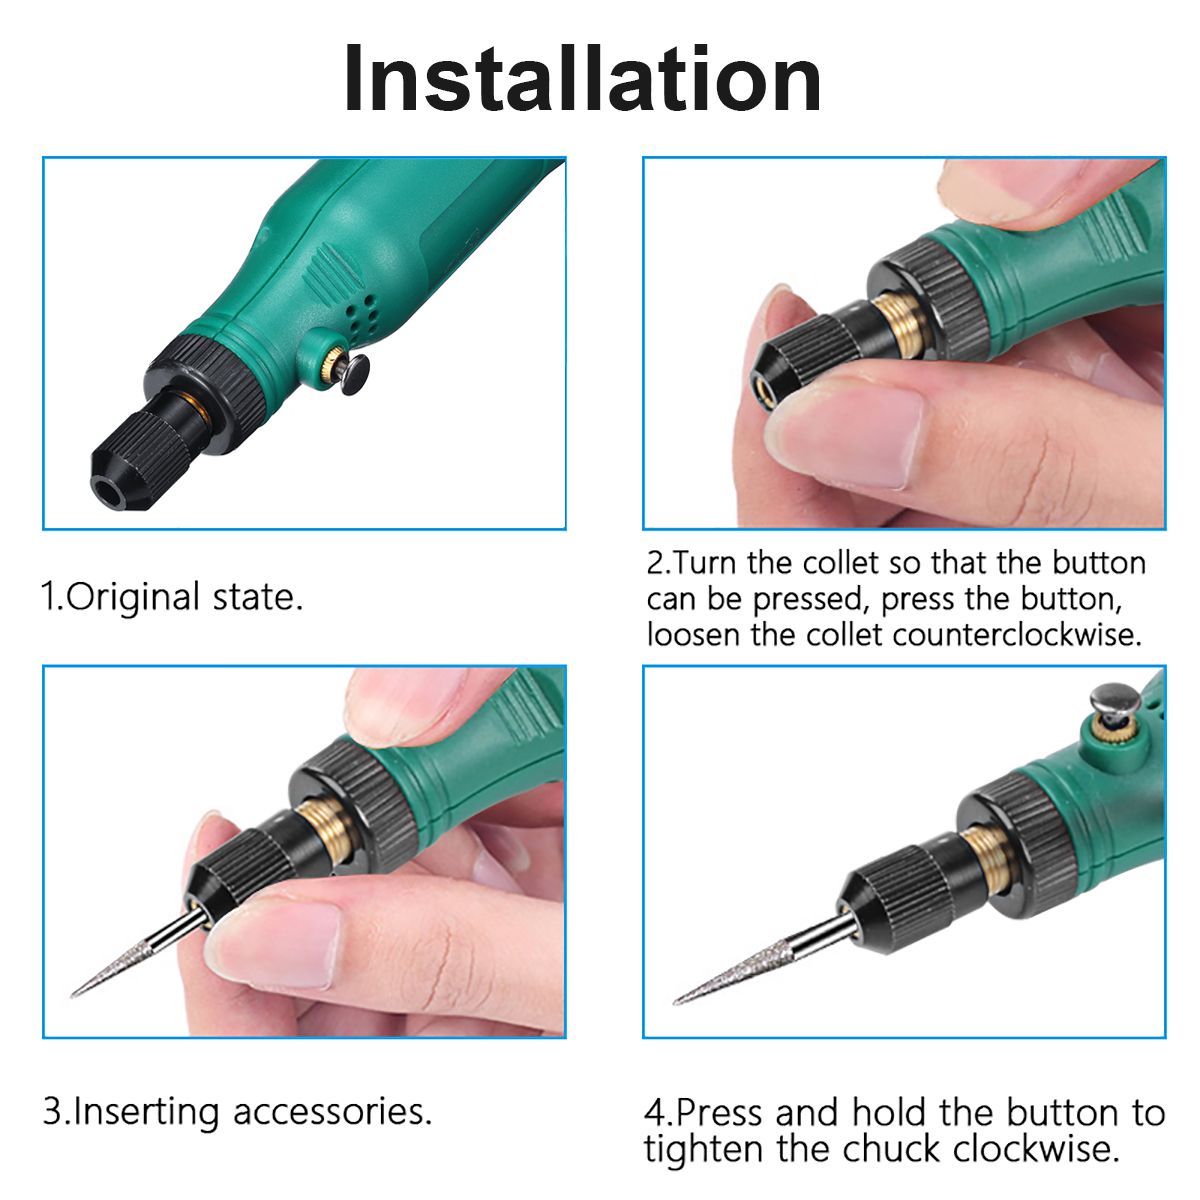 Rechargable-Adjustable-Speed-Grinder-Drill-Engraving-Pen-Mini-Electric-Drill-Grinder-Carving-Polishi-1621863